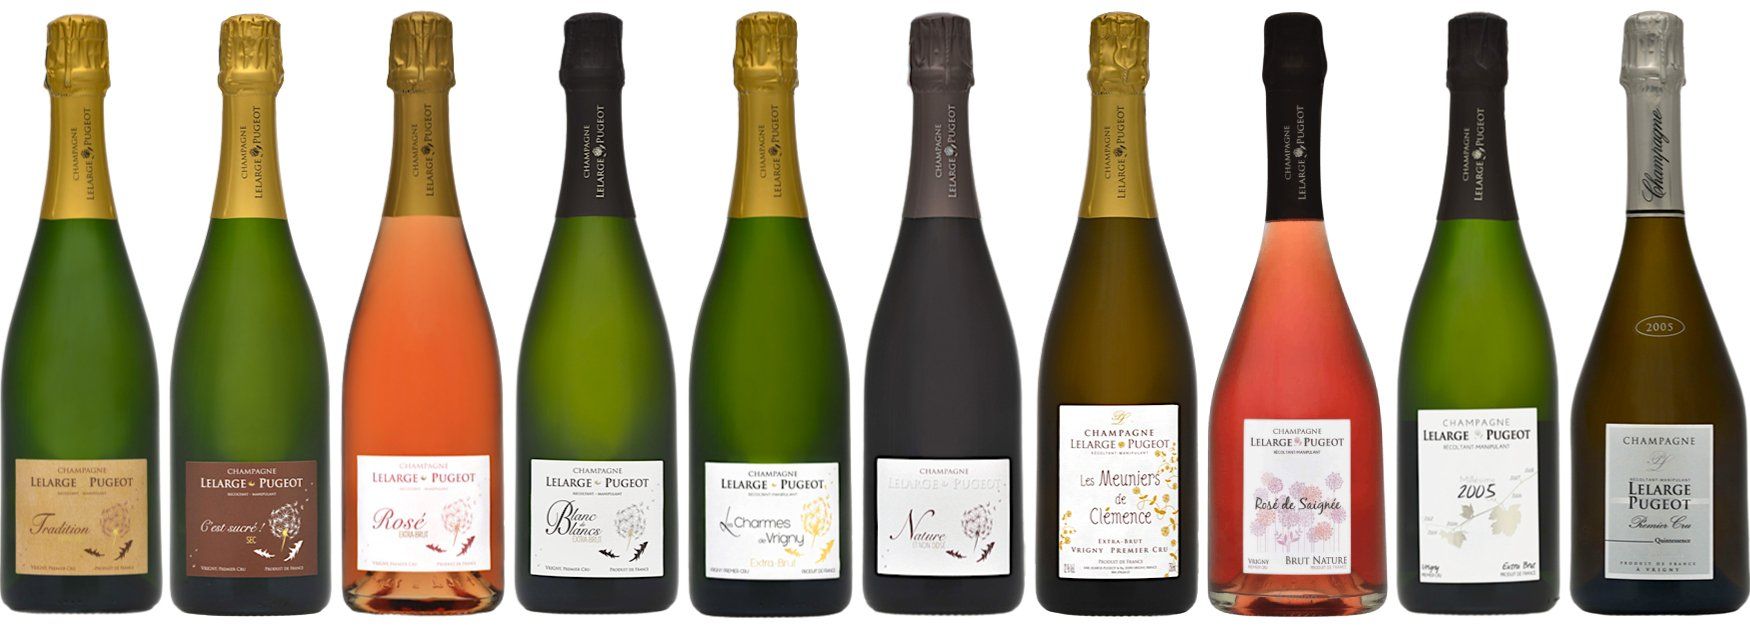 Lelarge-Pugeot - Line-up of Wines Available in Alberta and Saskatchewan